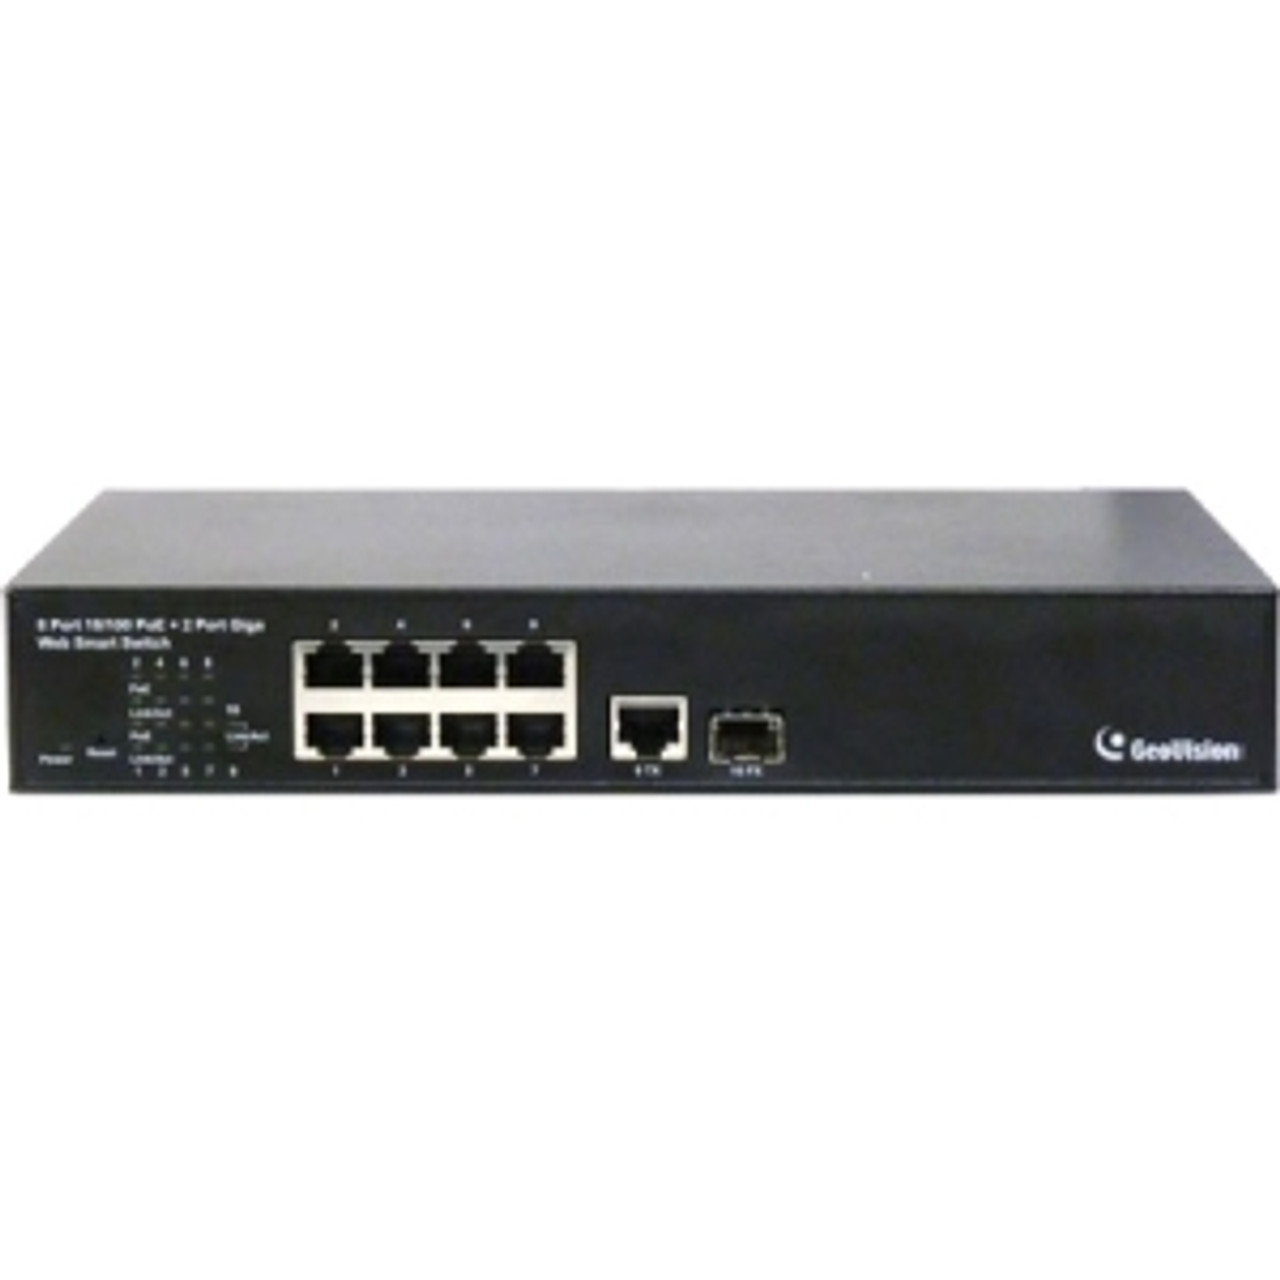 GV-POE0801 GeoVision 8-Port 802.3at Web Management PoE Switch Manageable 2 Layer Supported Desktop, Rack-mountable, Under Table (Refurbished)